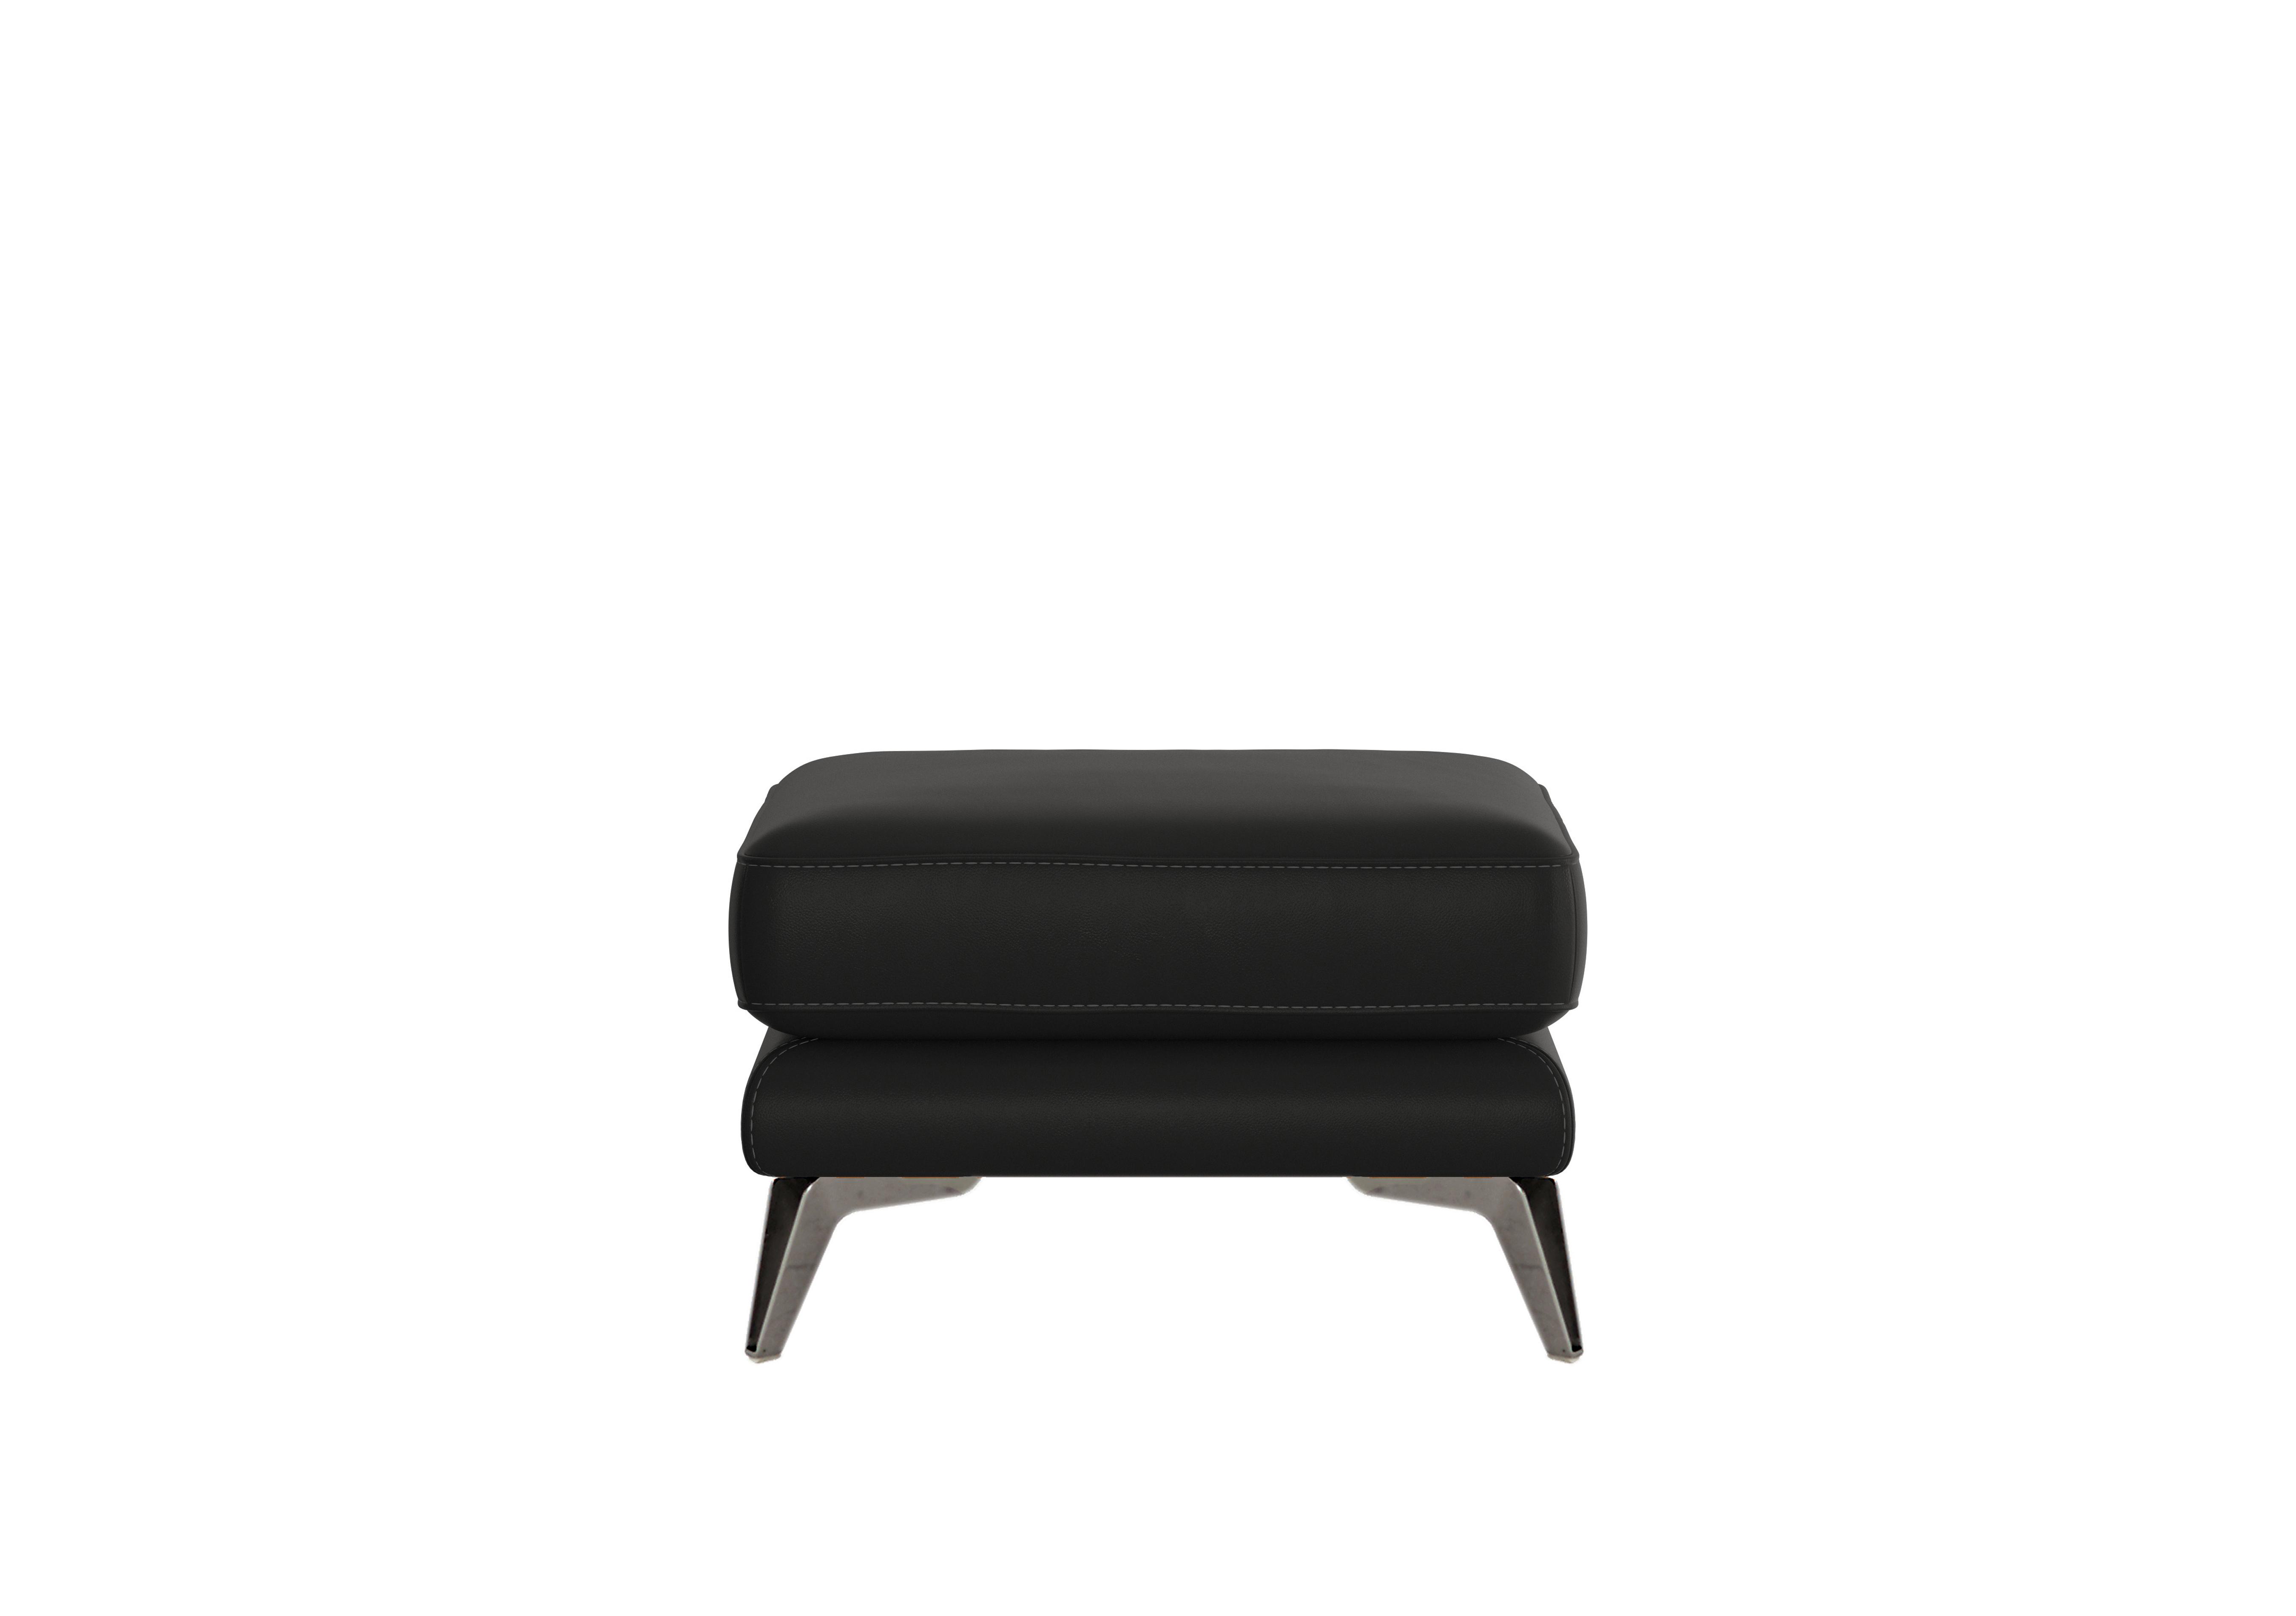 Contempo Leather Footstool in Bv-3500 Classic Black on Furniture Village